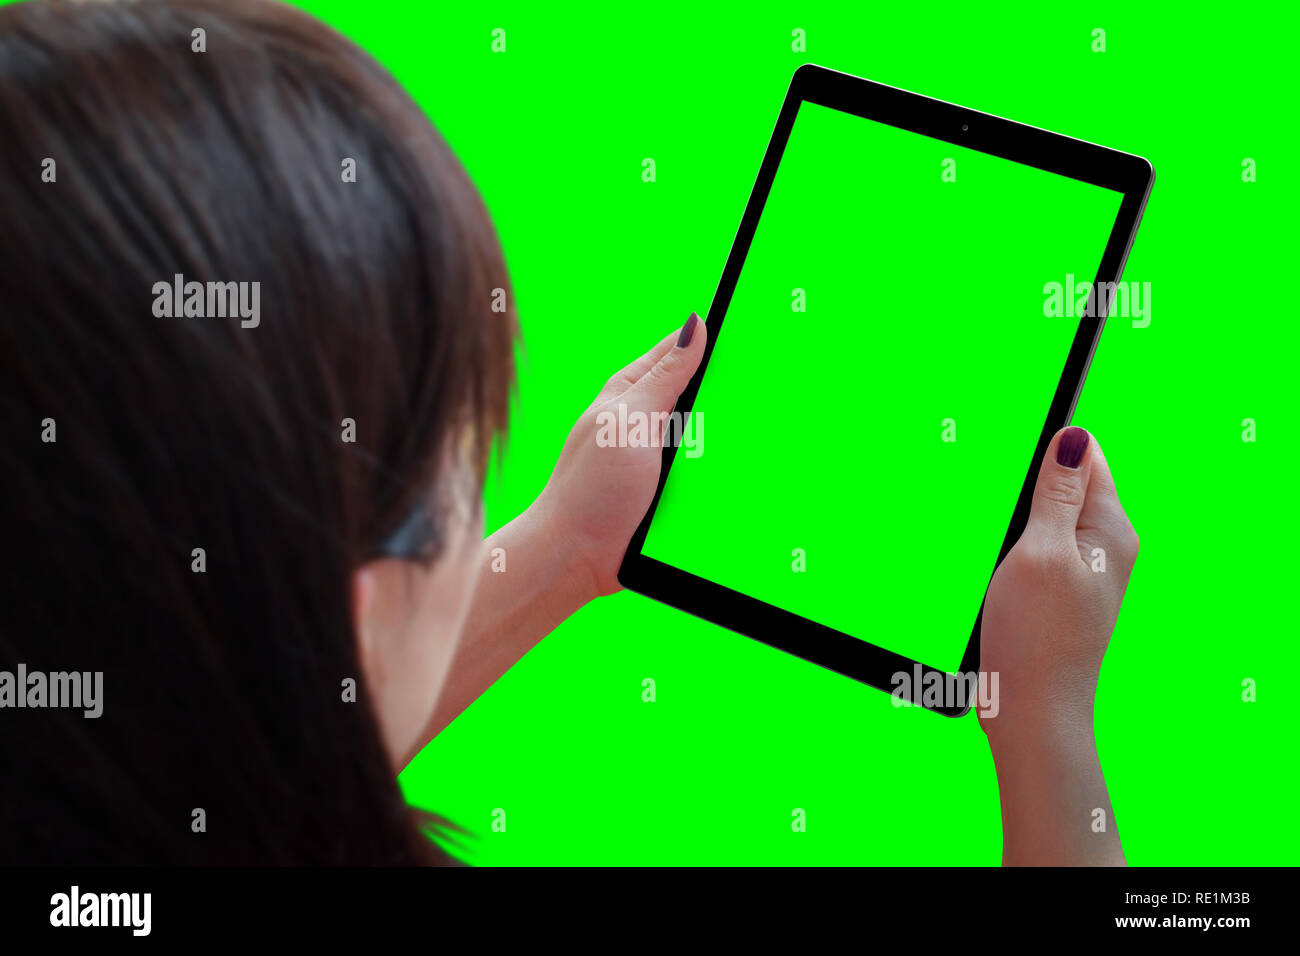 Woman play game or watching video on tablet. Isolated background and screen in green. View over the shoulder. Stock Photo